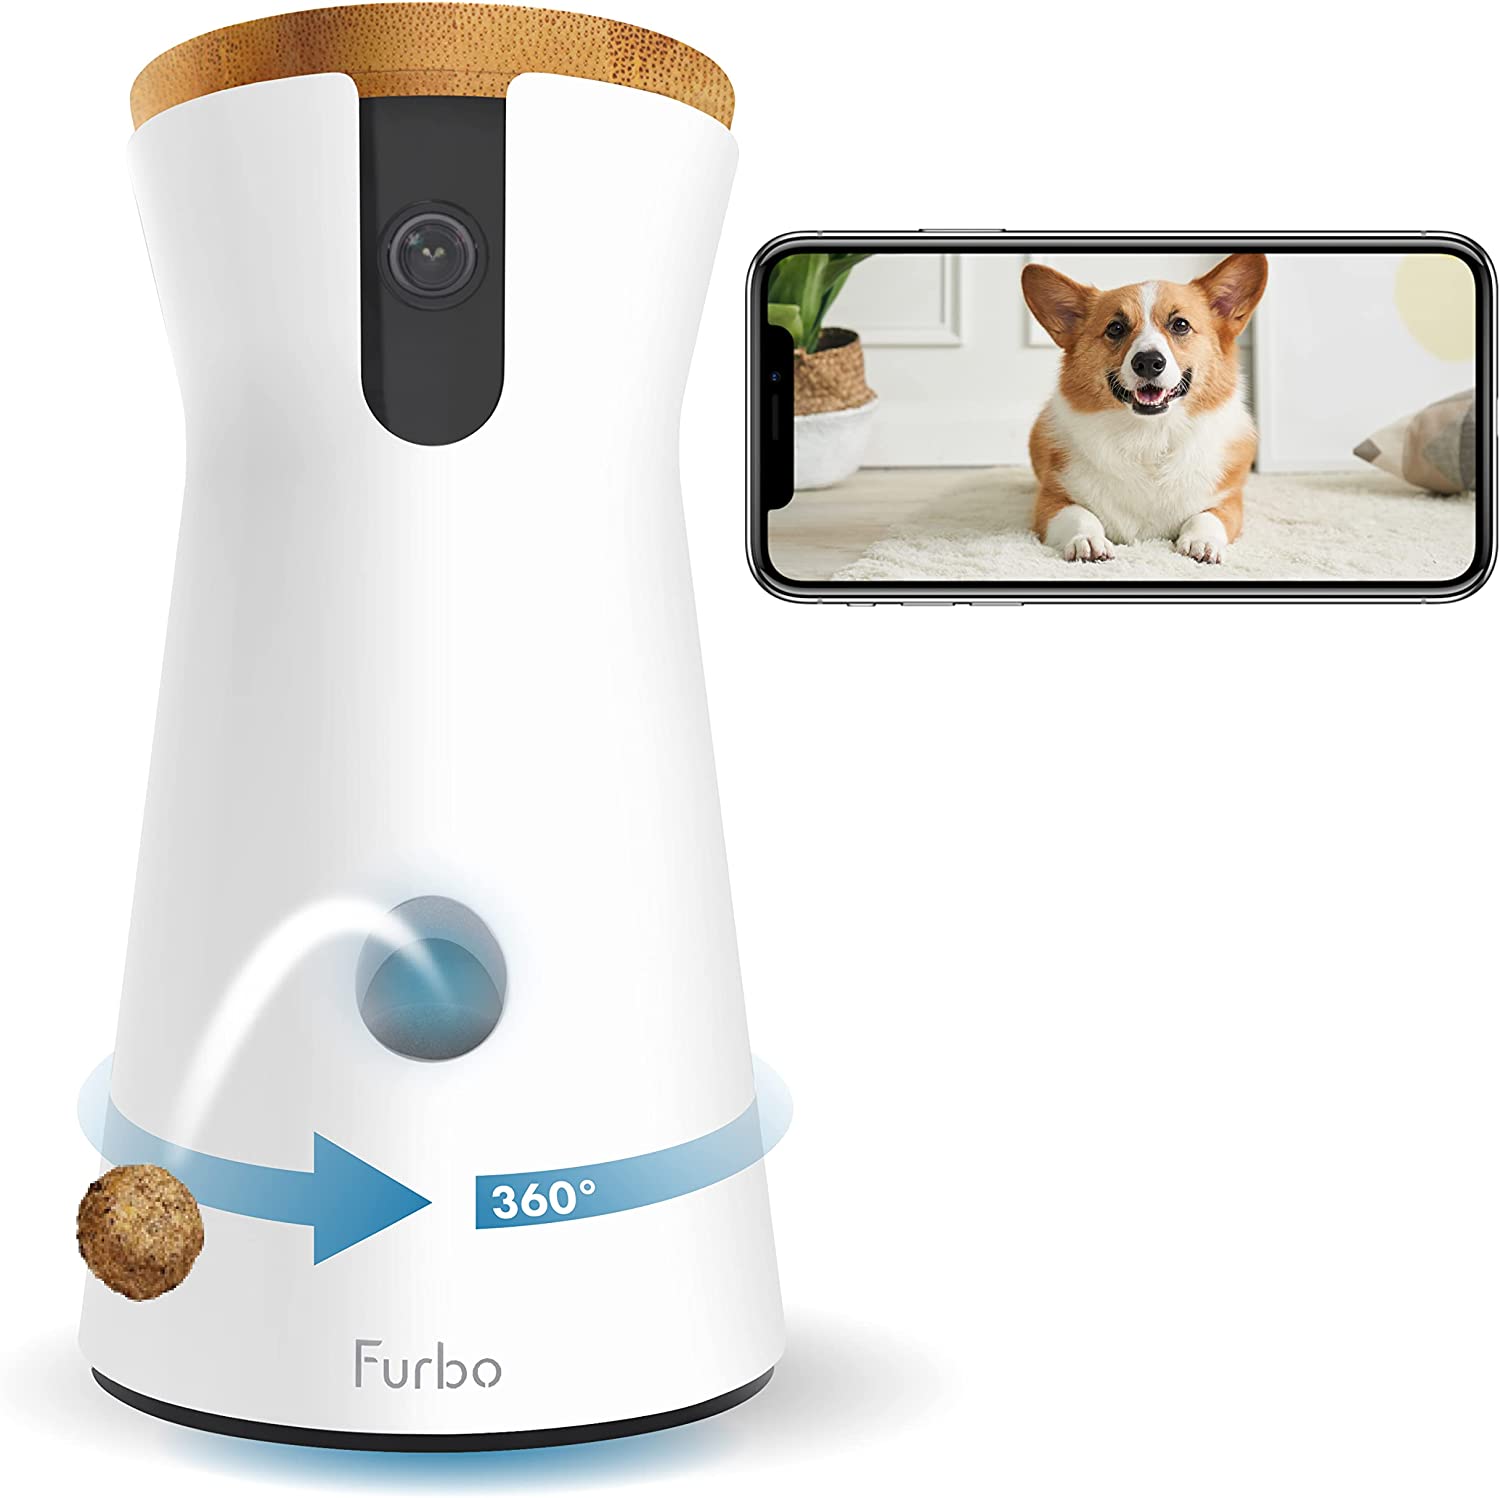 Furbo 360 with smartphone displayed next to it